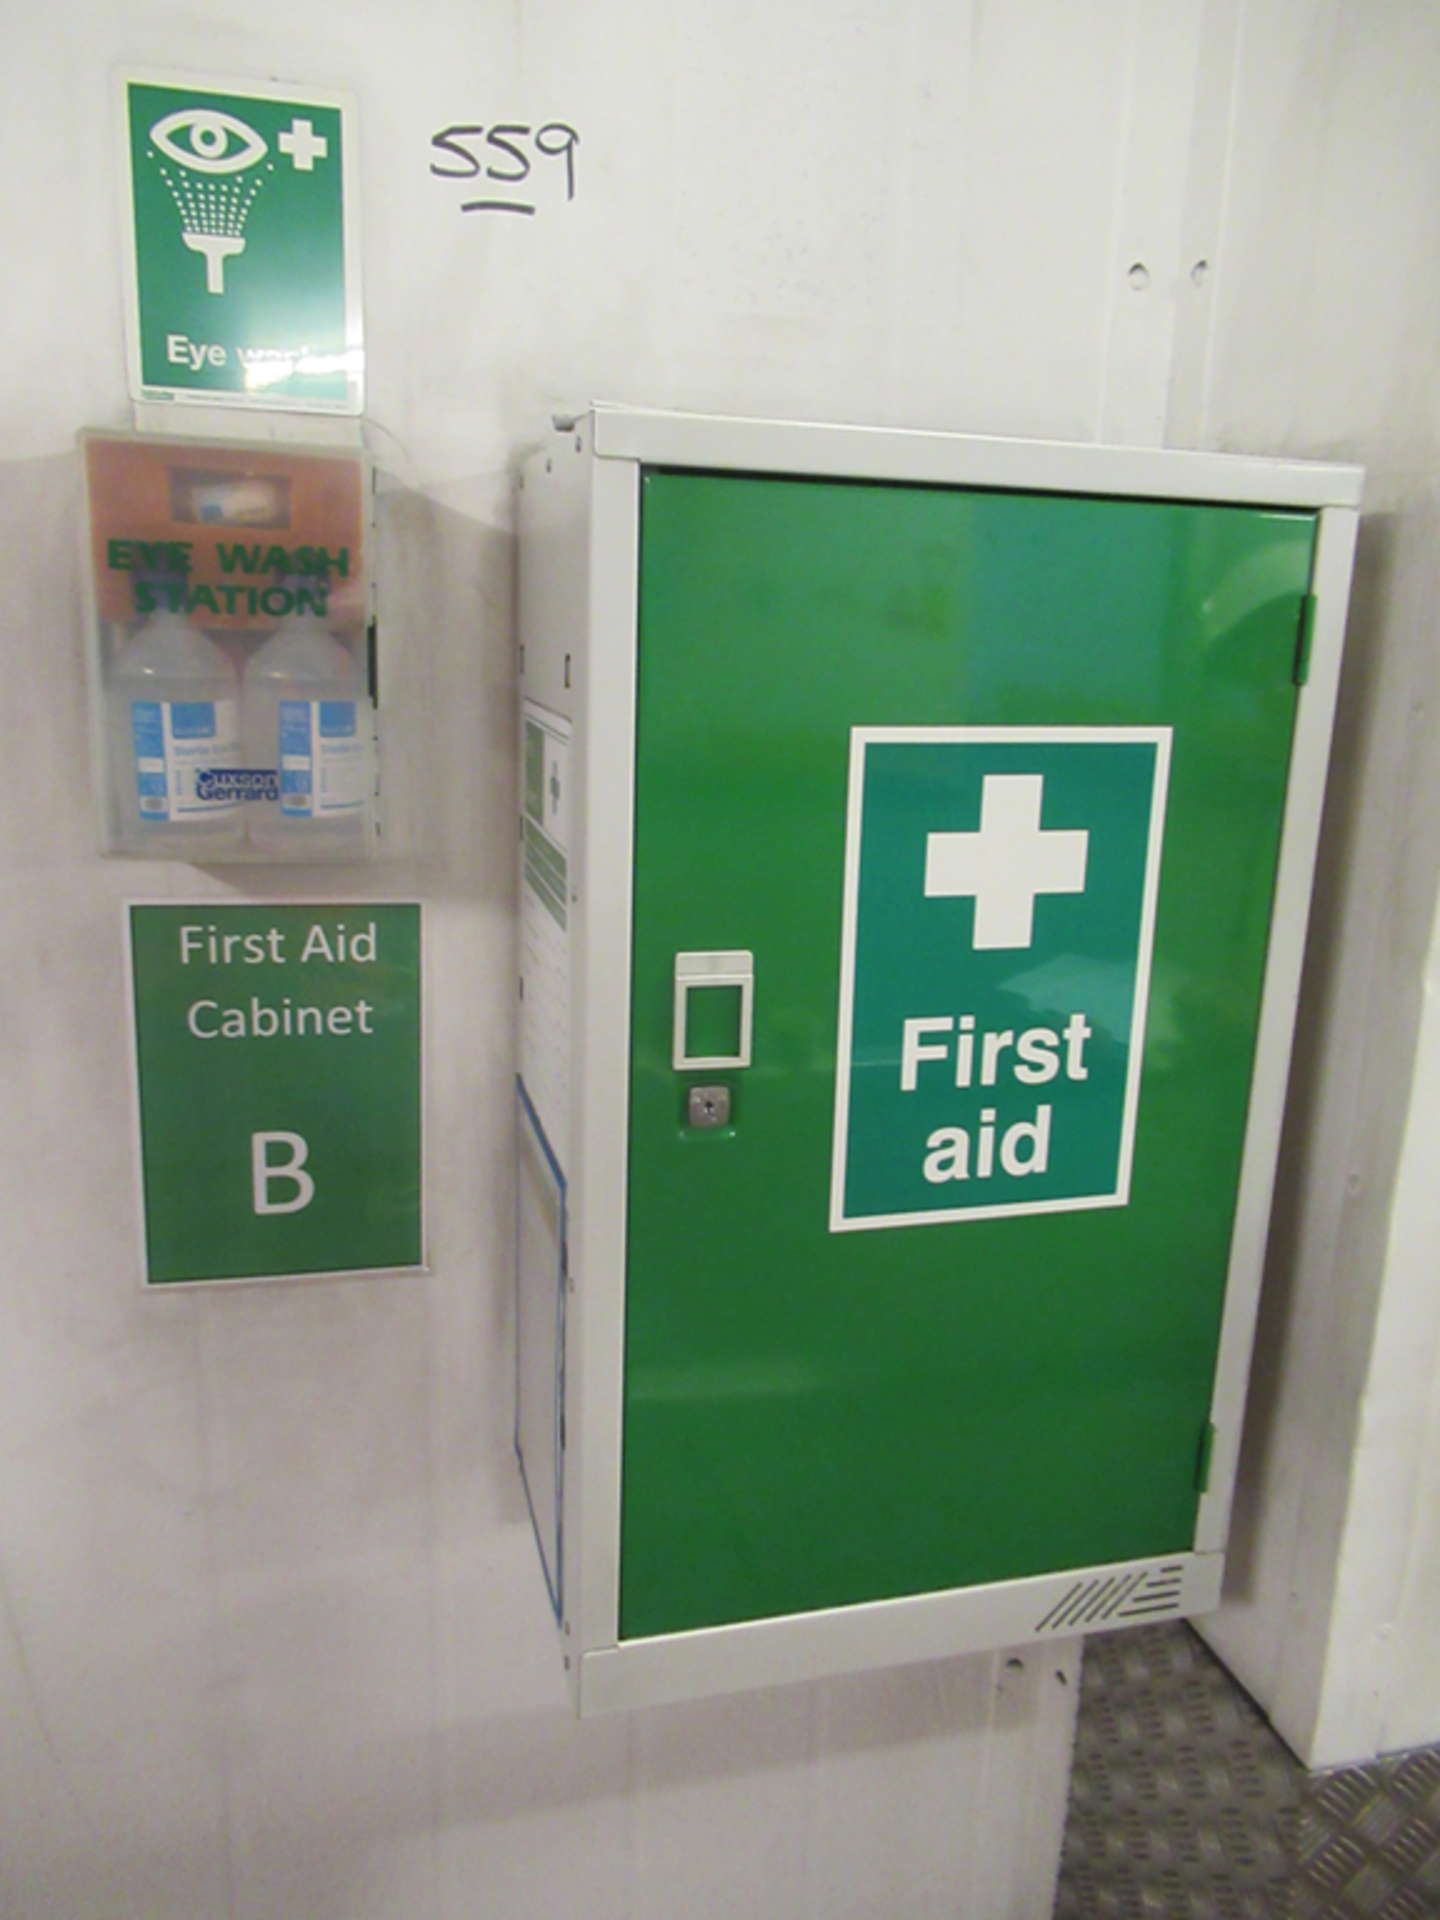 First Aid Box and Eye Wash Station - Image 2 of 2